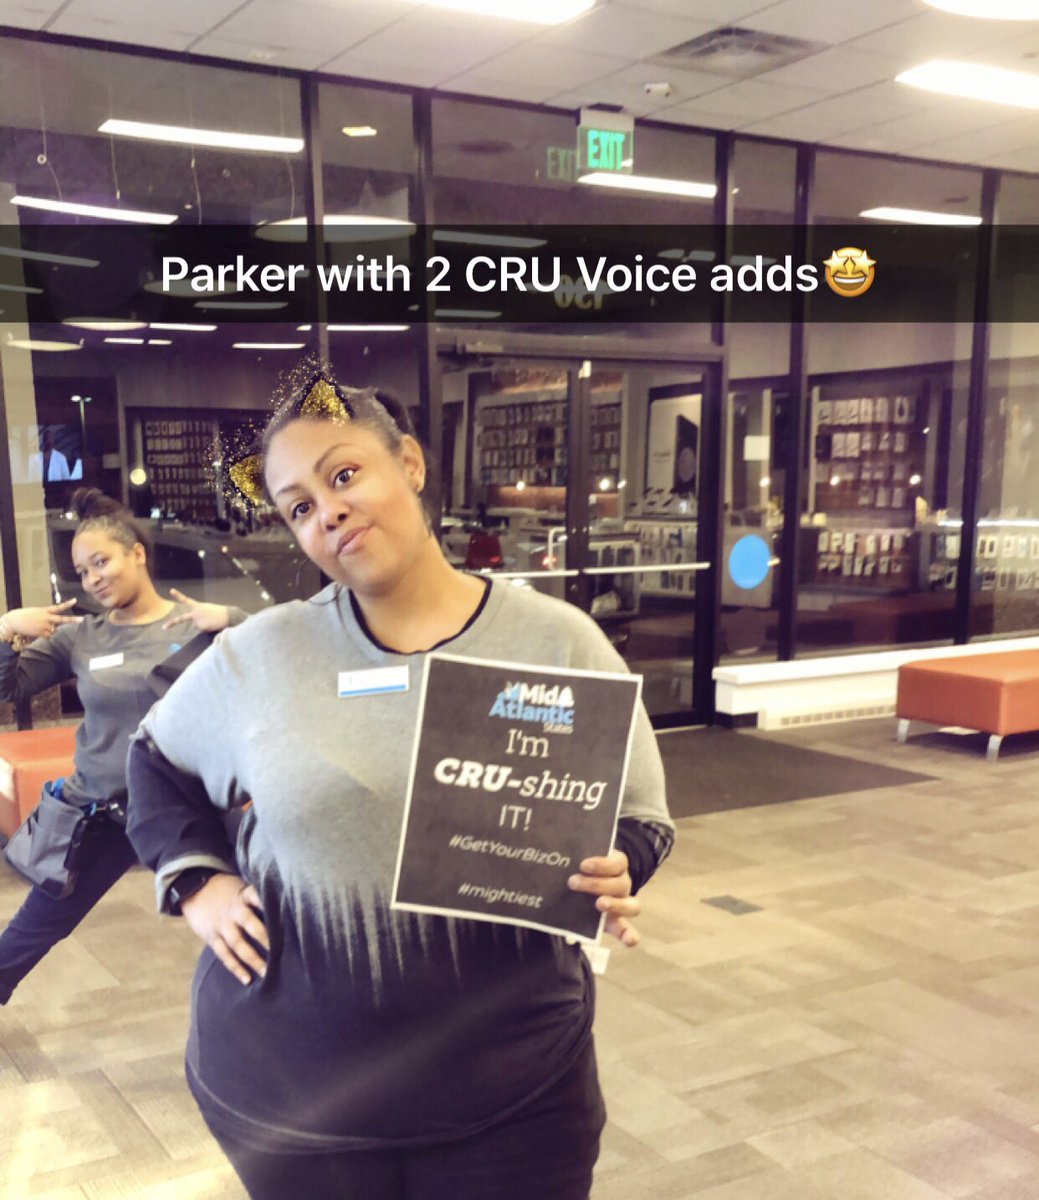 Parker With 2 CRU GA SB!!! 2 A Day Is The Mission!!! Mission accomplished!!! #WinYourDay 2 A Day = 60 month 😉 let’s get it !!! @404girl @WhitFaris @ChristinaV_CV @sheehycru It’s all about the culture!! #Mightiest #TeamSupreme